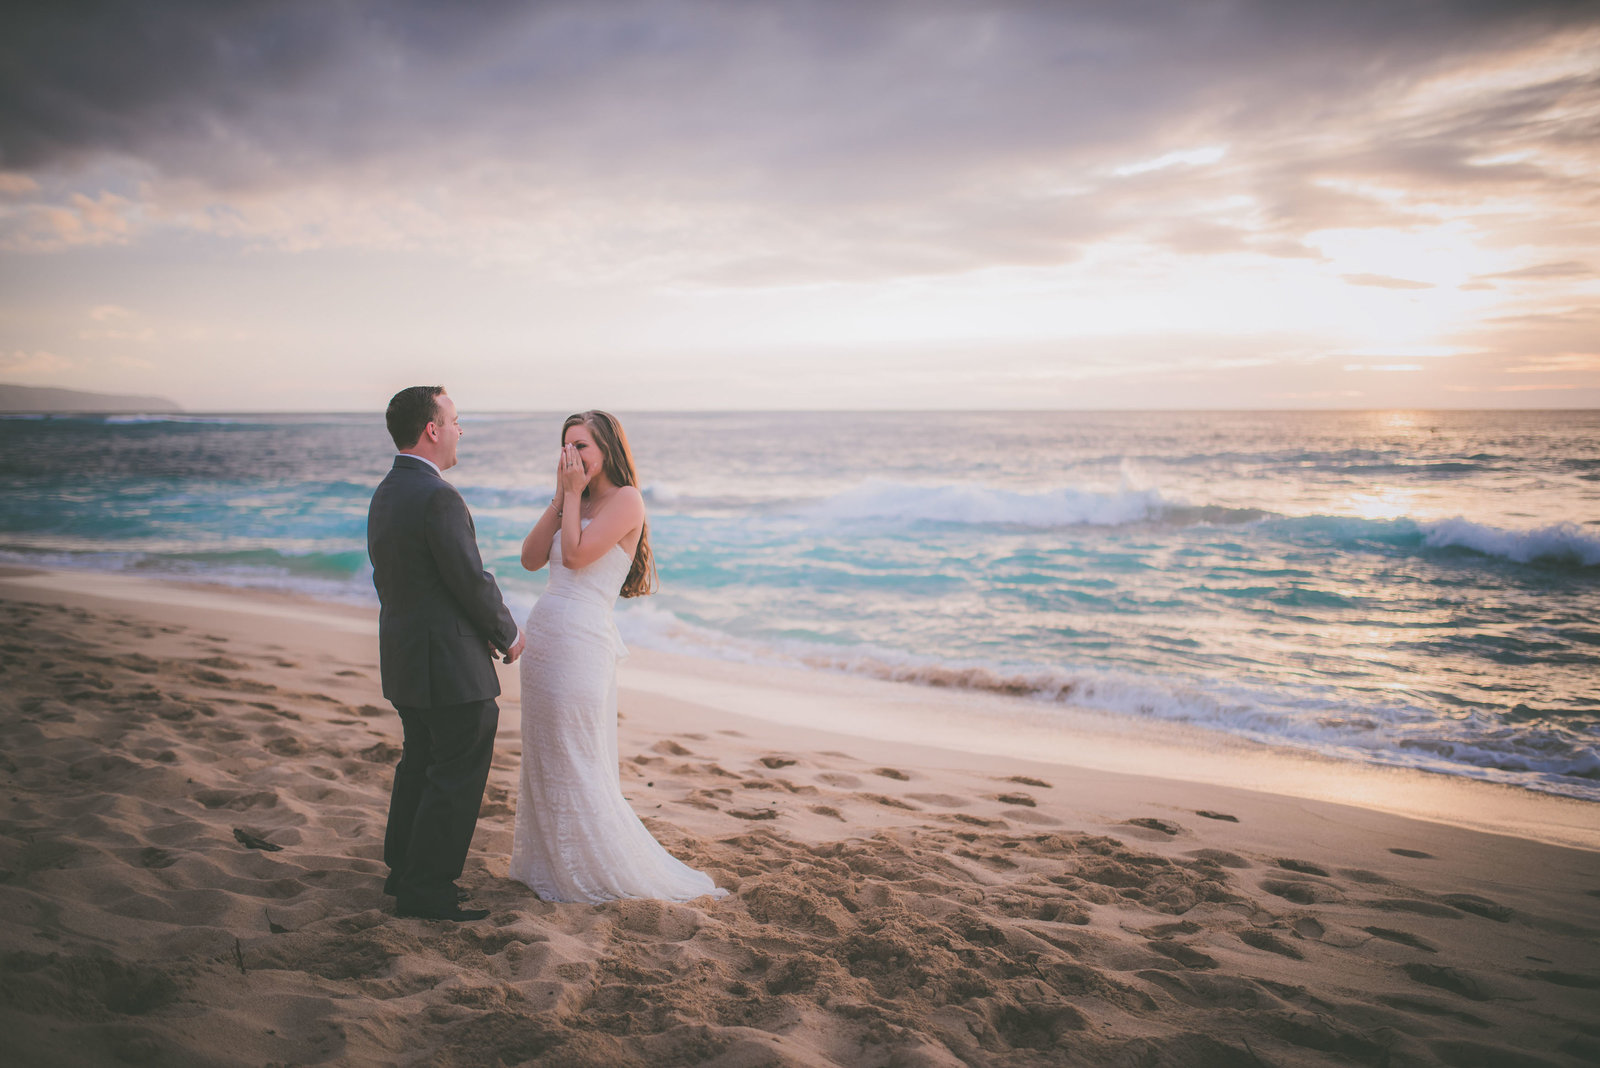 Bride places hands on her face while looking at groom on Oahu beach.